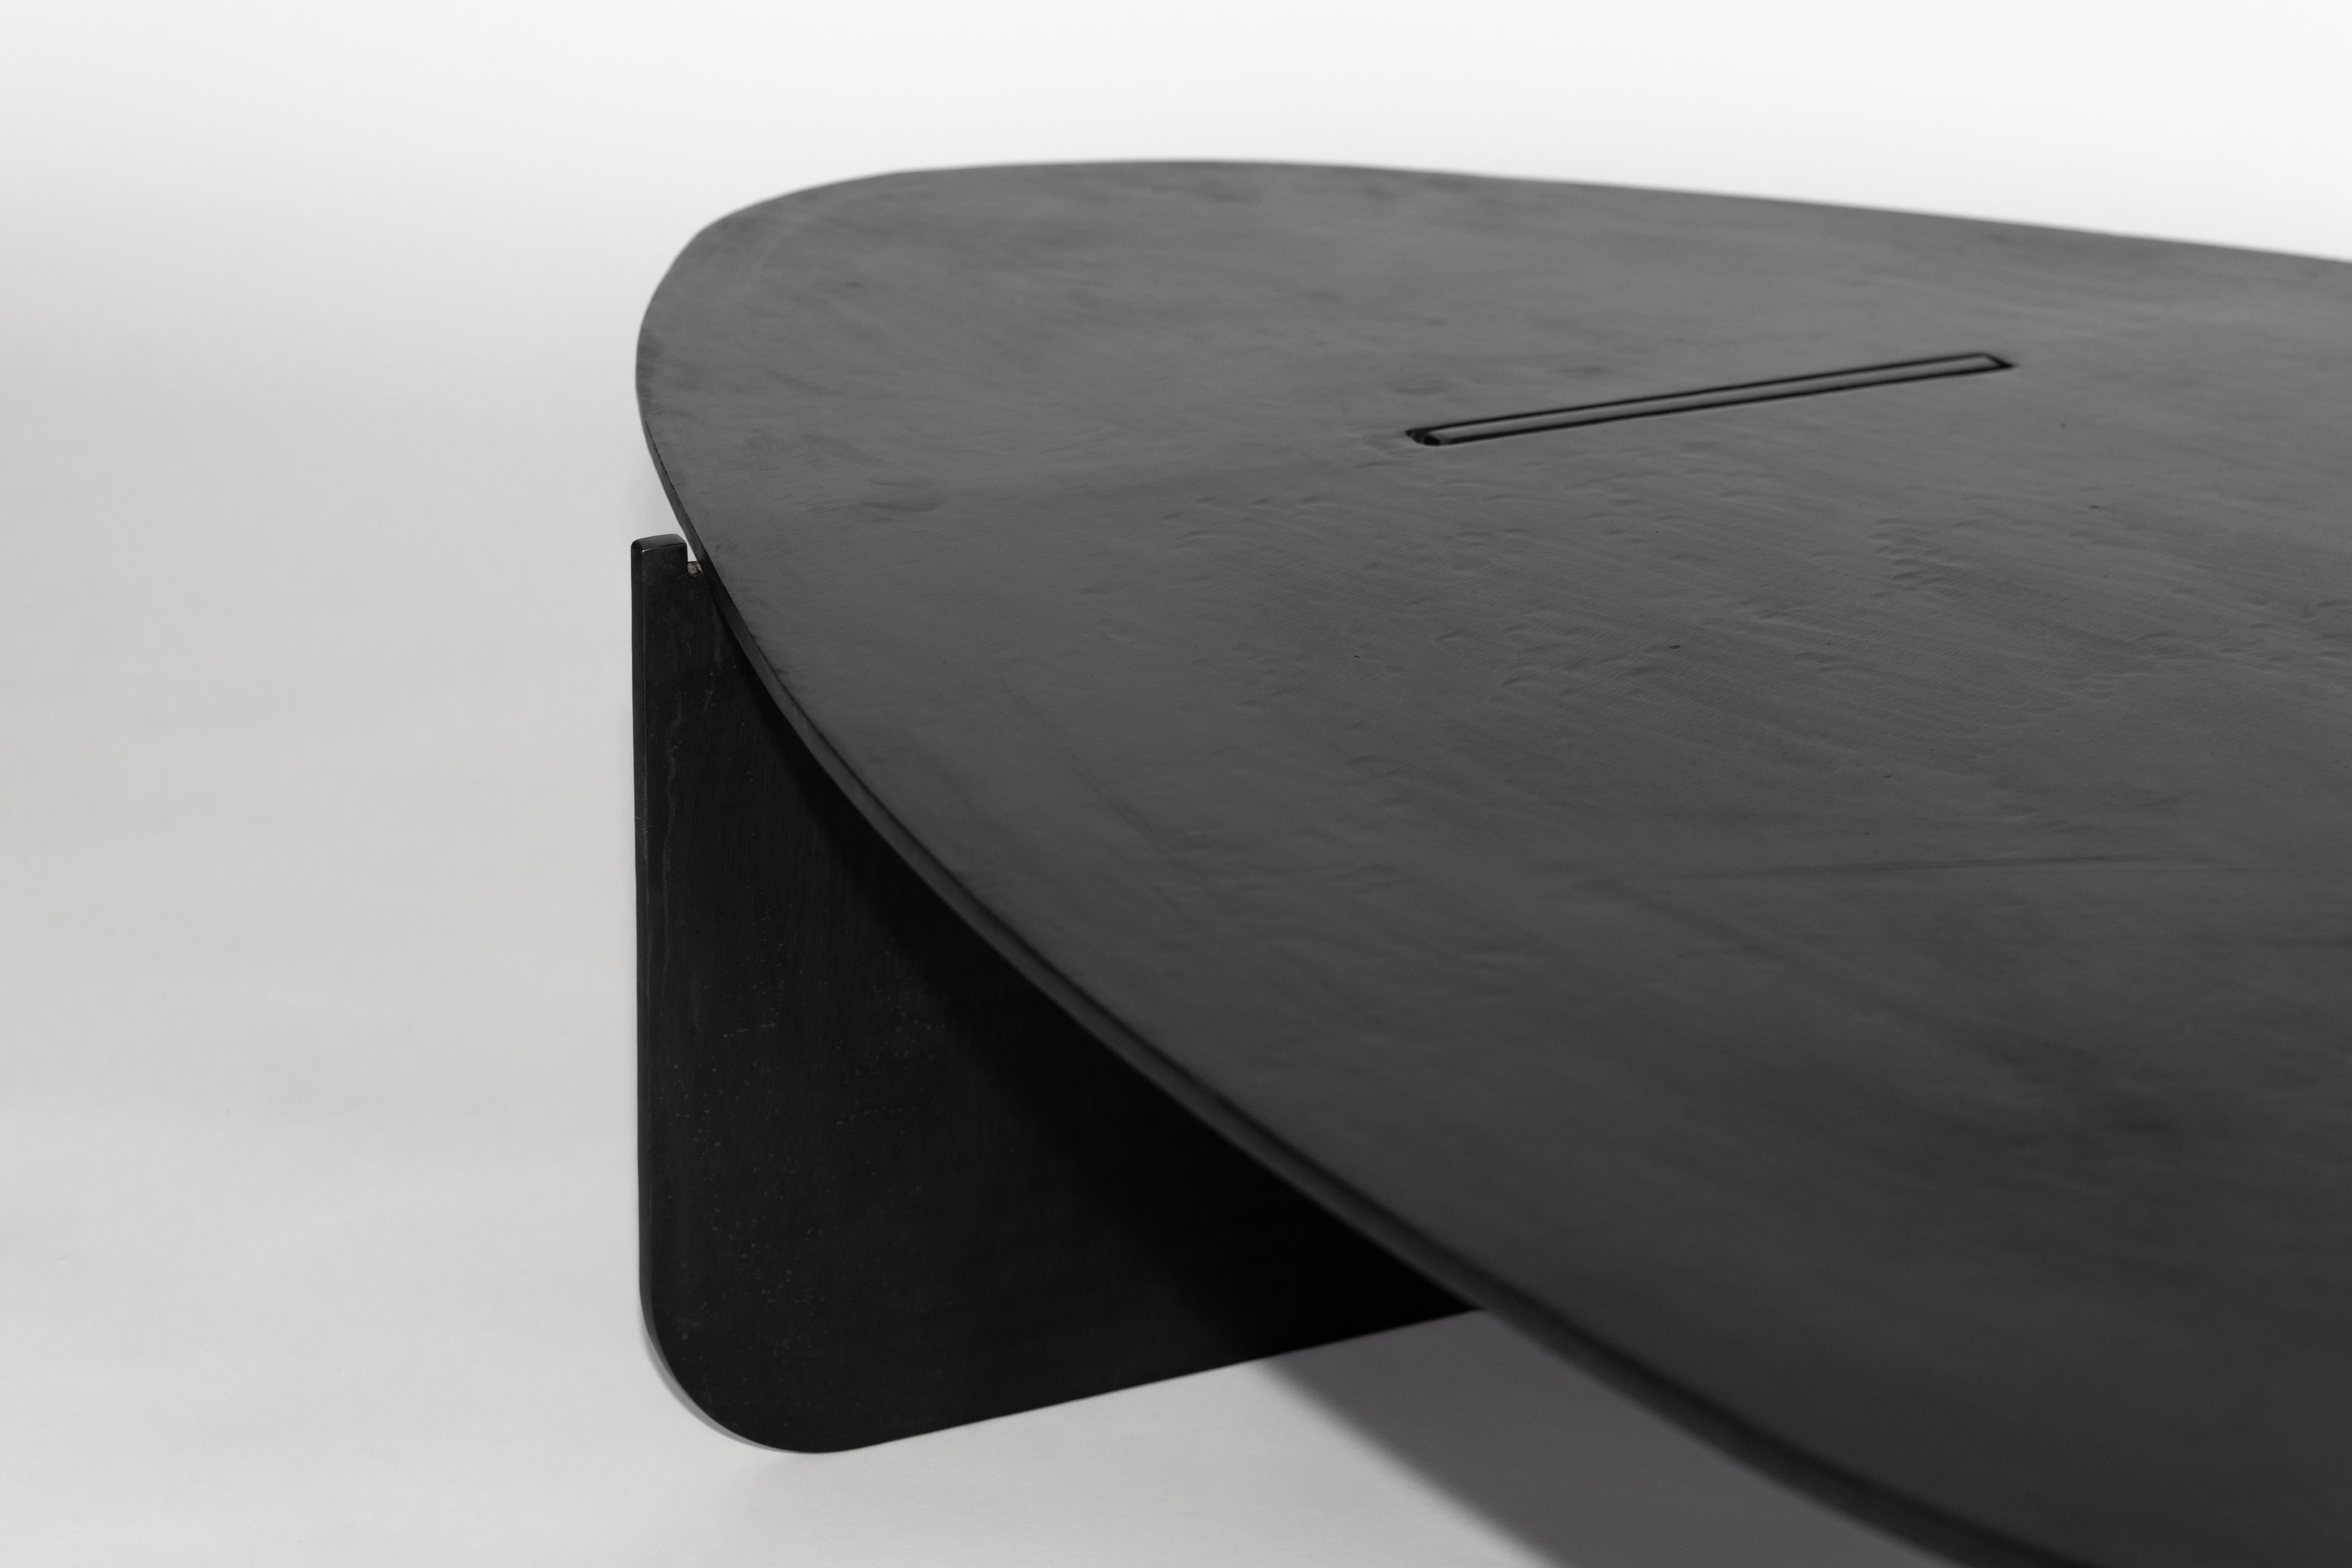 TABLE NO. 15 - COFFEE TABLE 
J.M. Szymanski
d. 2019

This Noguchi-inspired coffee table is handcrafted in 3/8” thick steel, with a natural black patina and wax finish, to create an ulta-modern and inspired look. 

Custom sizes available. Made in the